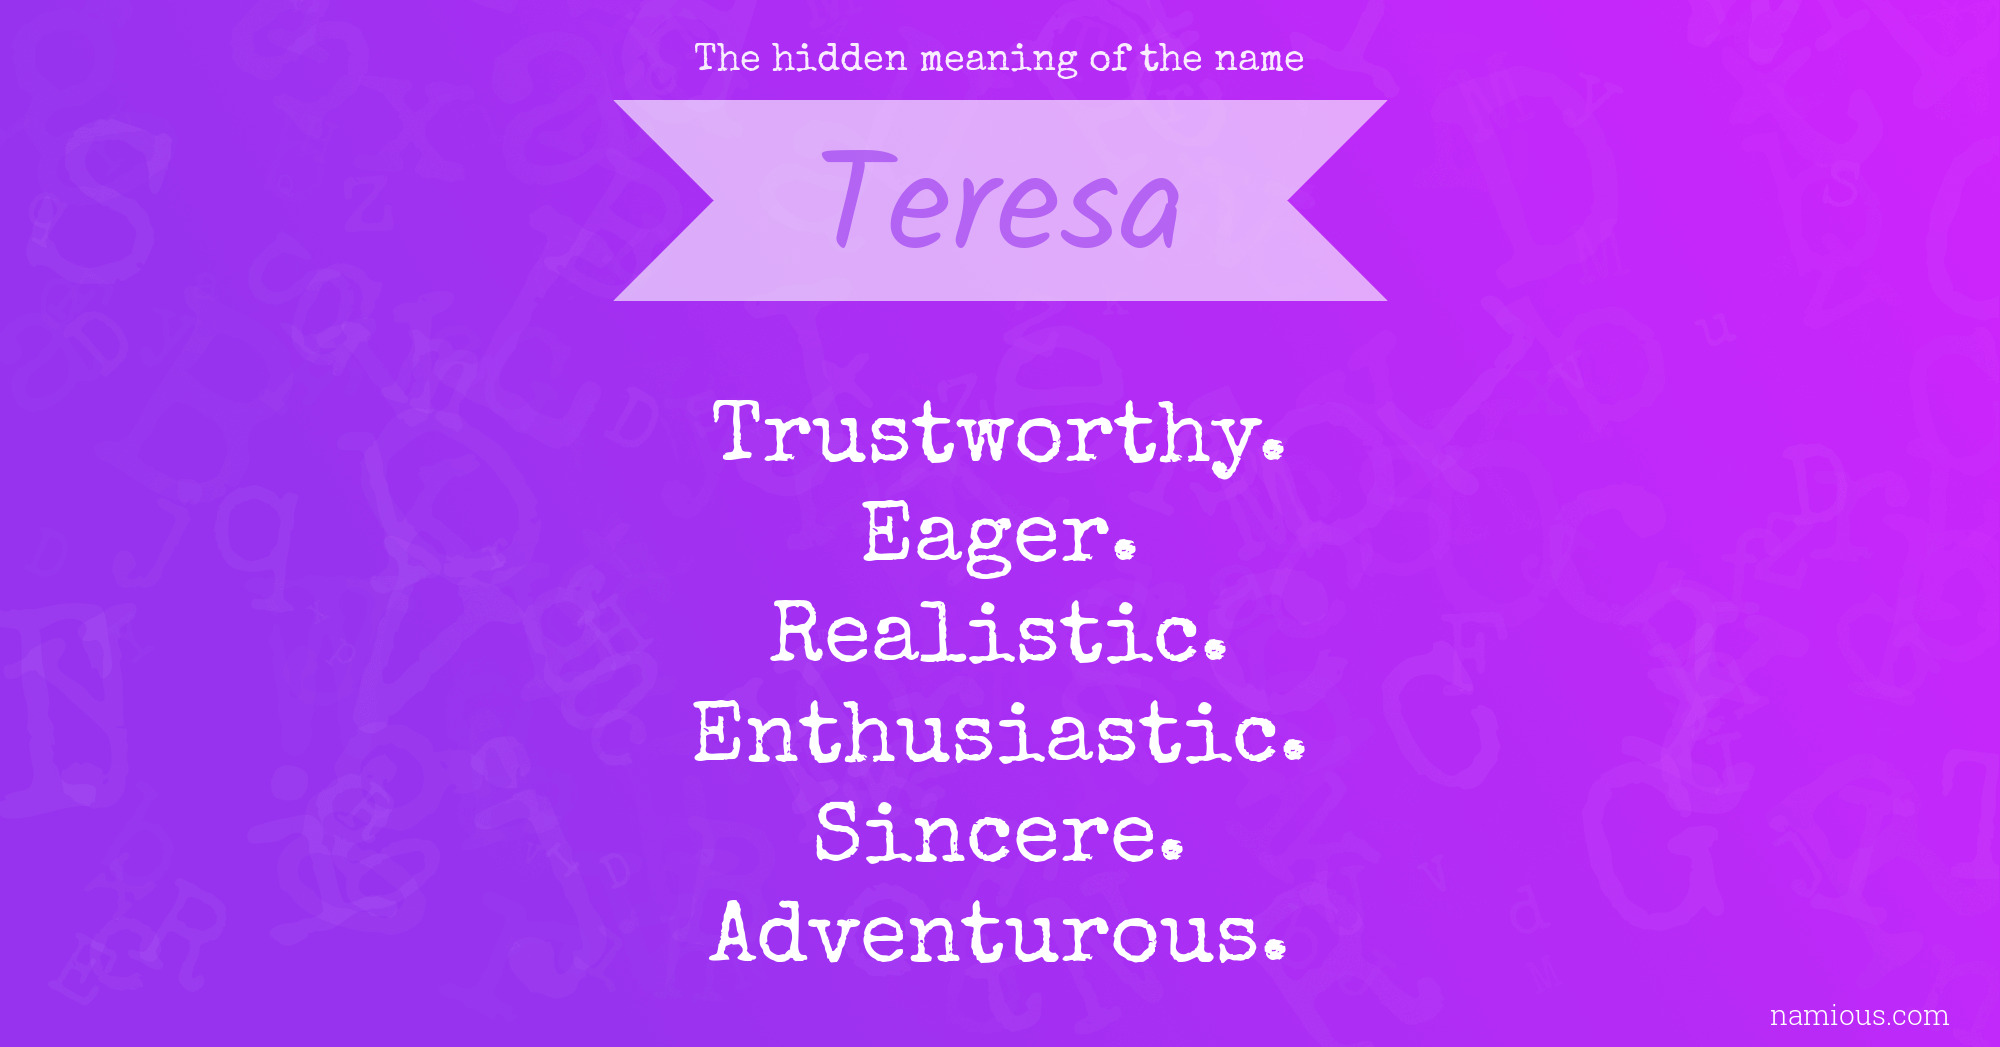 The hidden meaning of the name Teresa